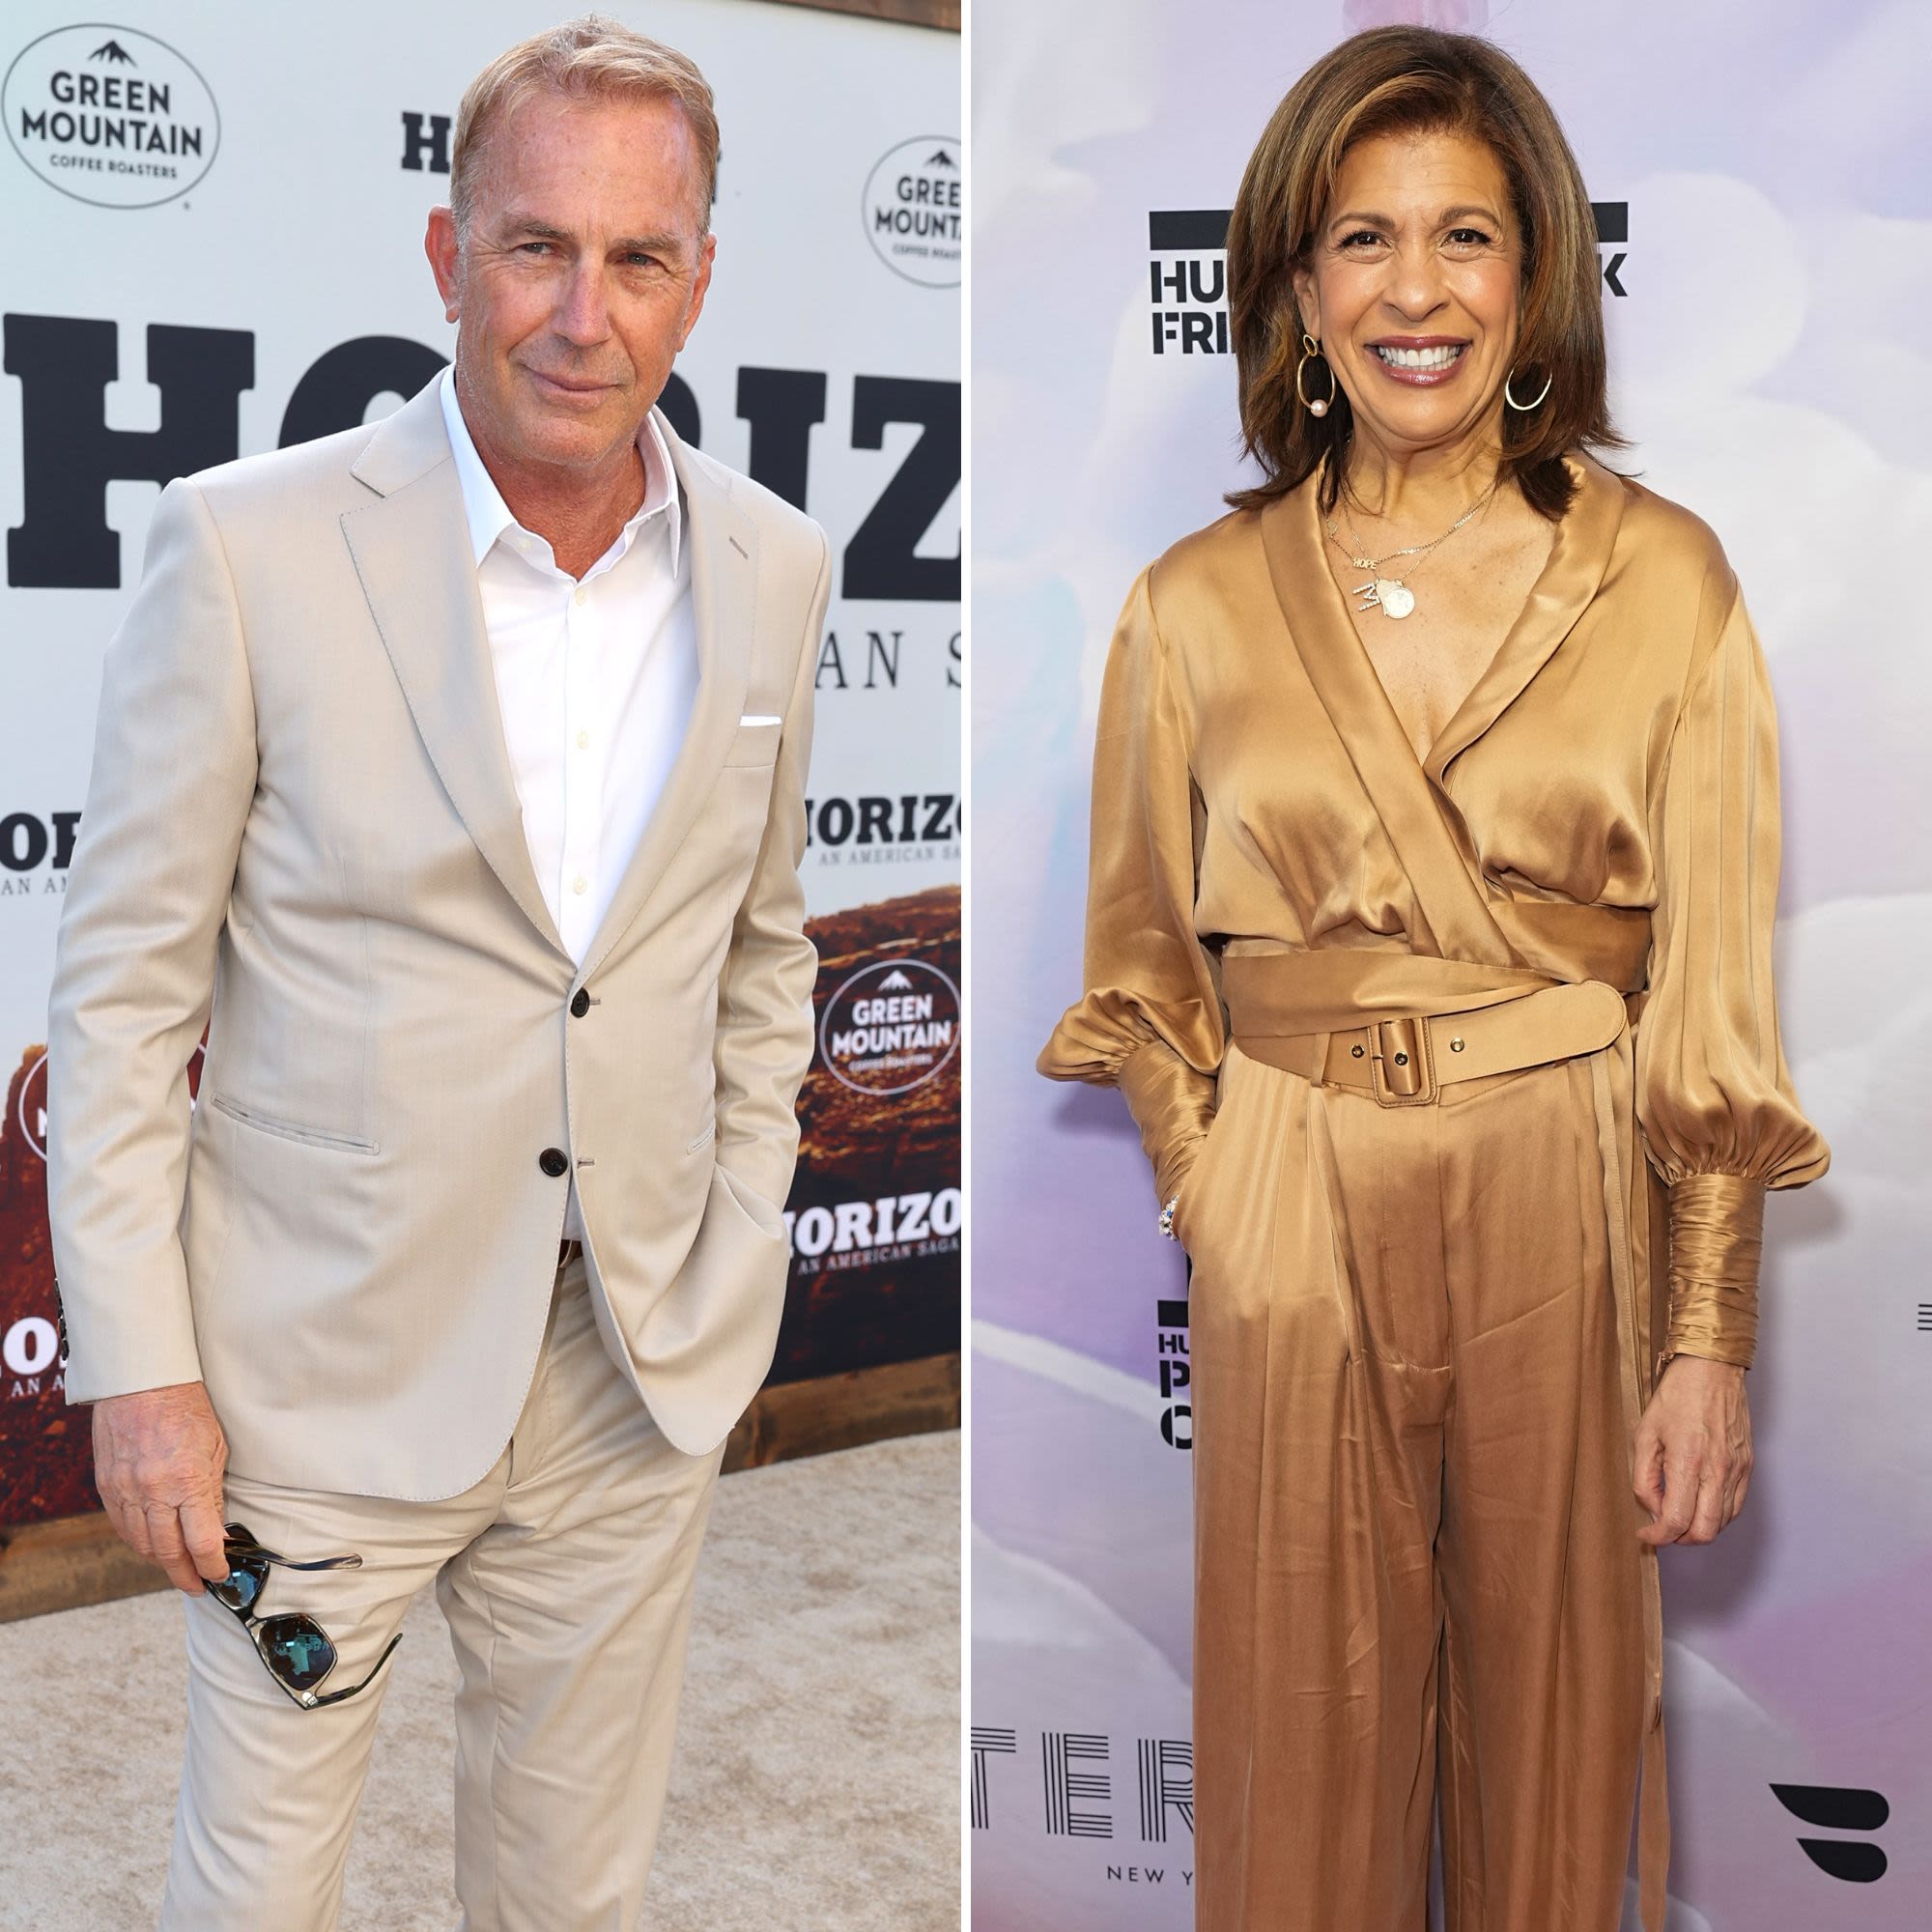 Hoda Kotb Isn’t What Kevin Costner Is ‘Looking for’ When It Comes to Dating